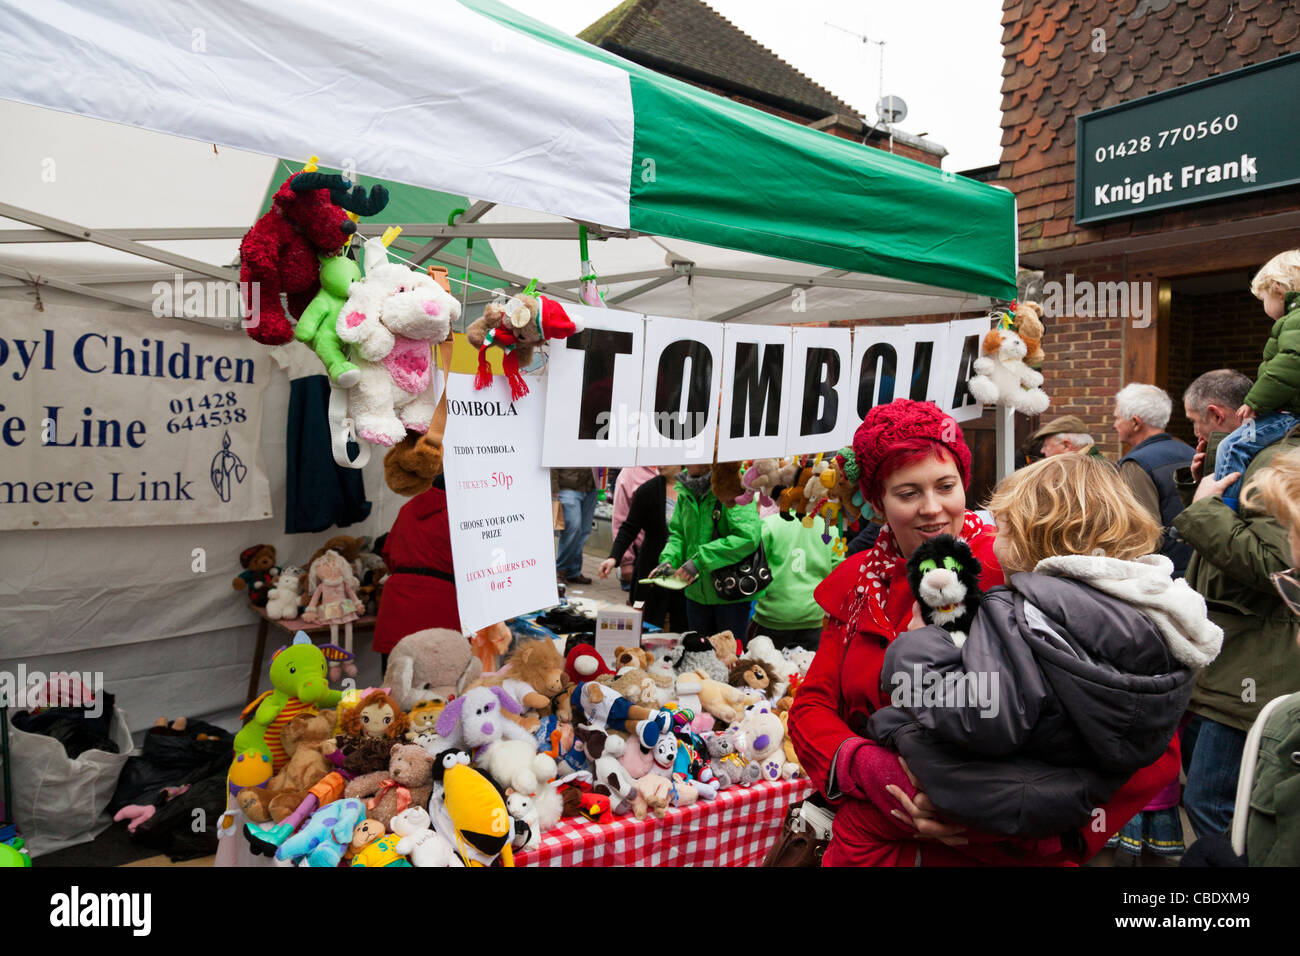 Woman with red knitted hat and child at a tombola stall at a Christmas market. Stock Photo